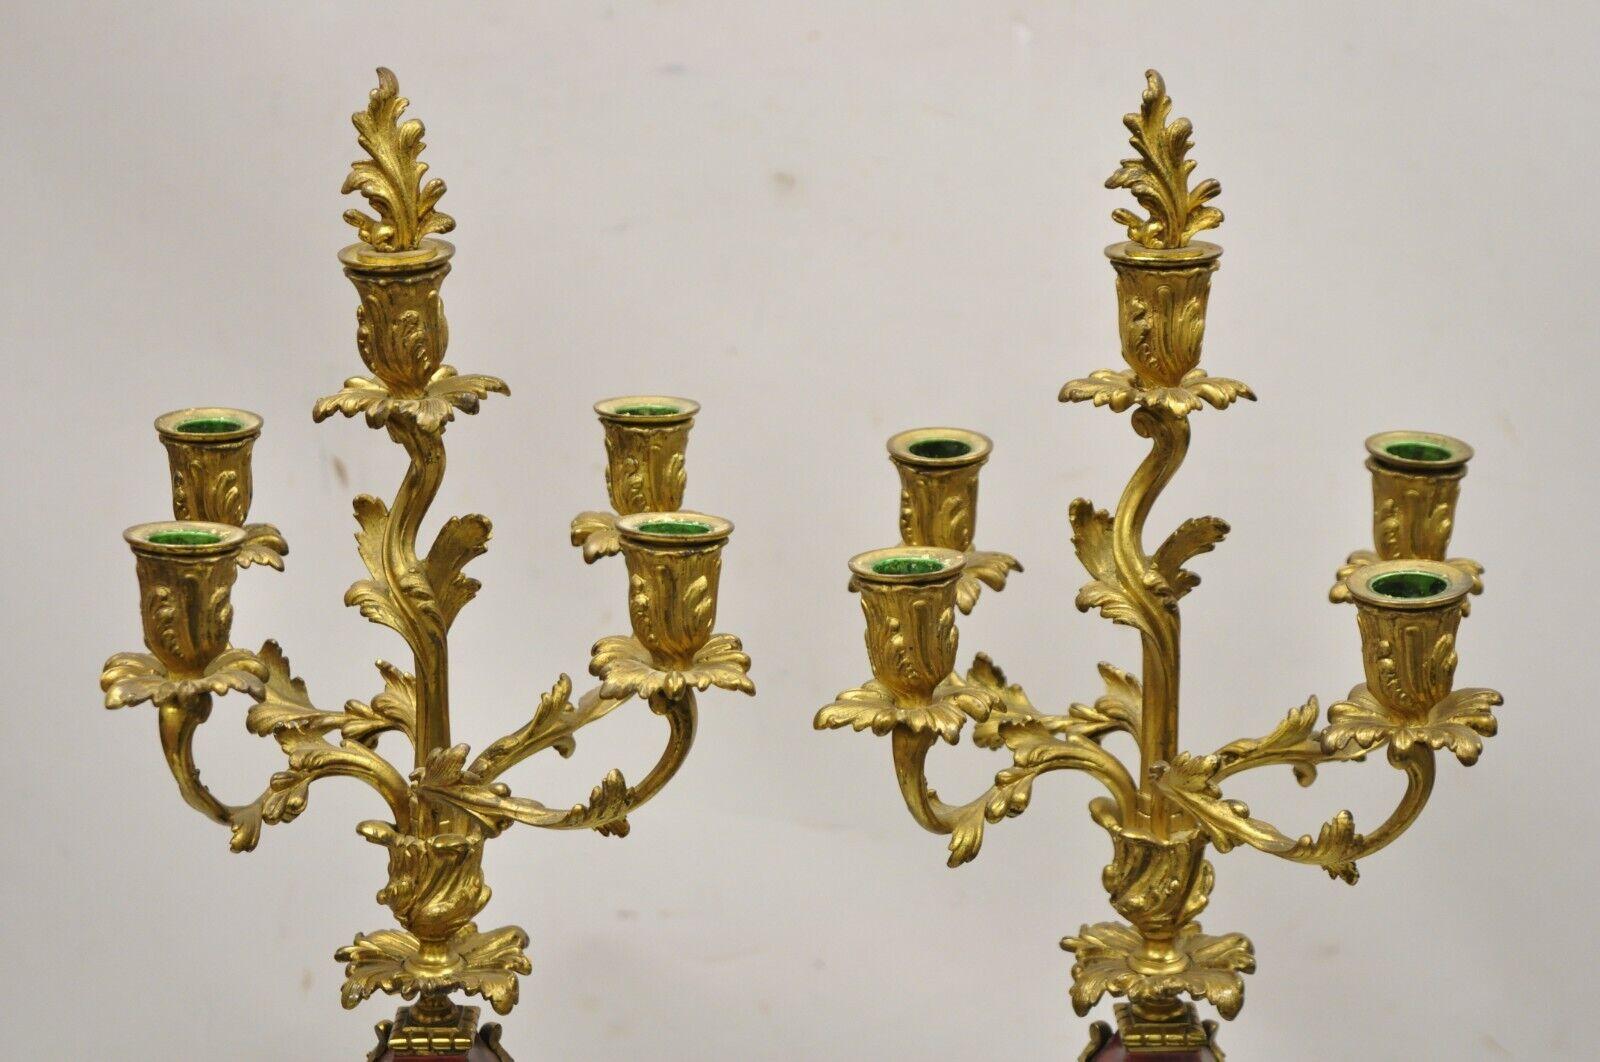 Antique French Louis XV Rococo Style Gold Gilt Bronze Candelabras, a Pair In Good Condition For Sale In Philadelphia, PA